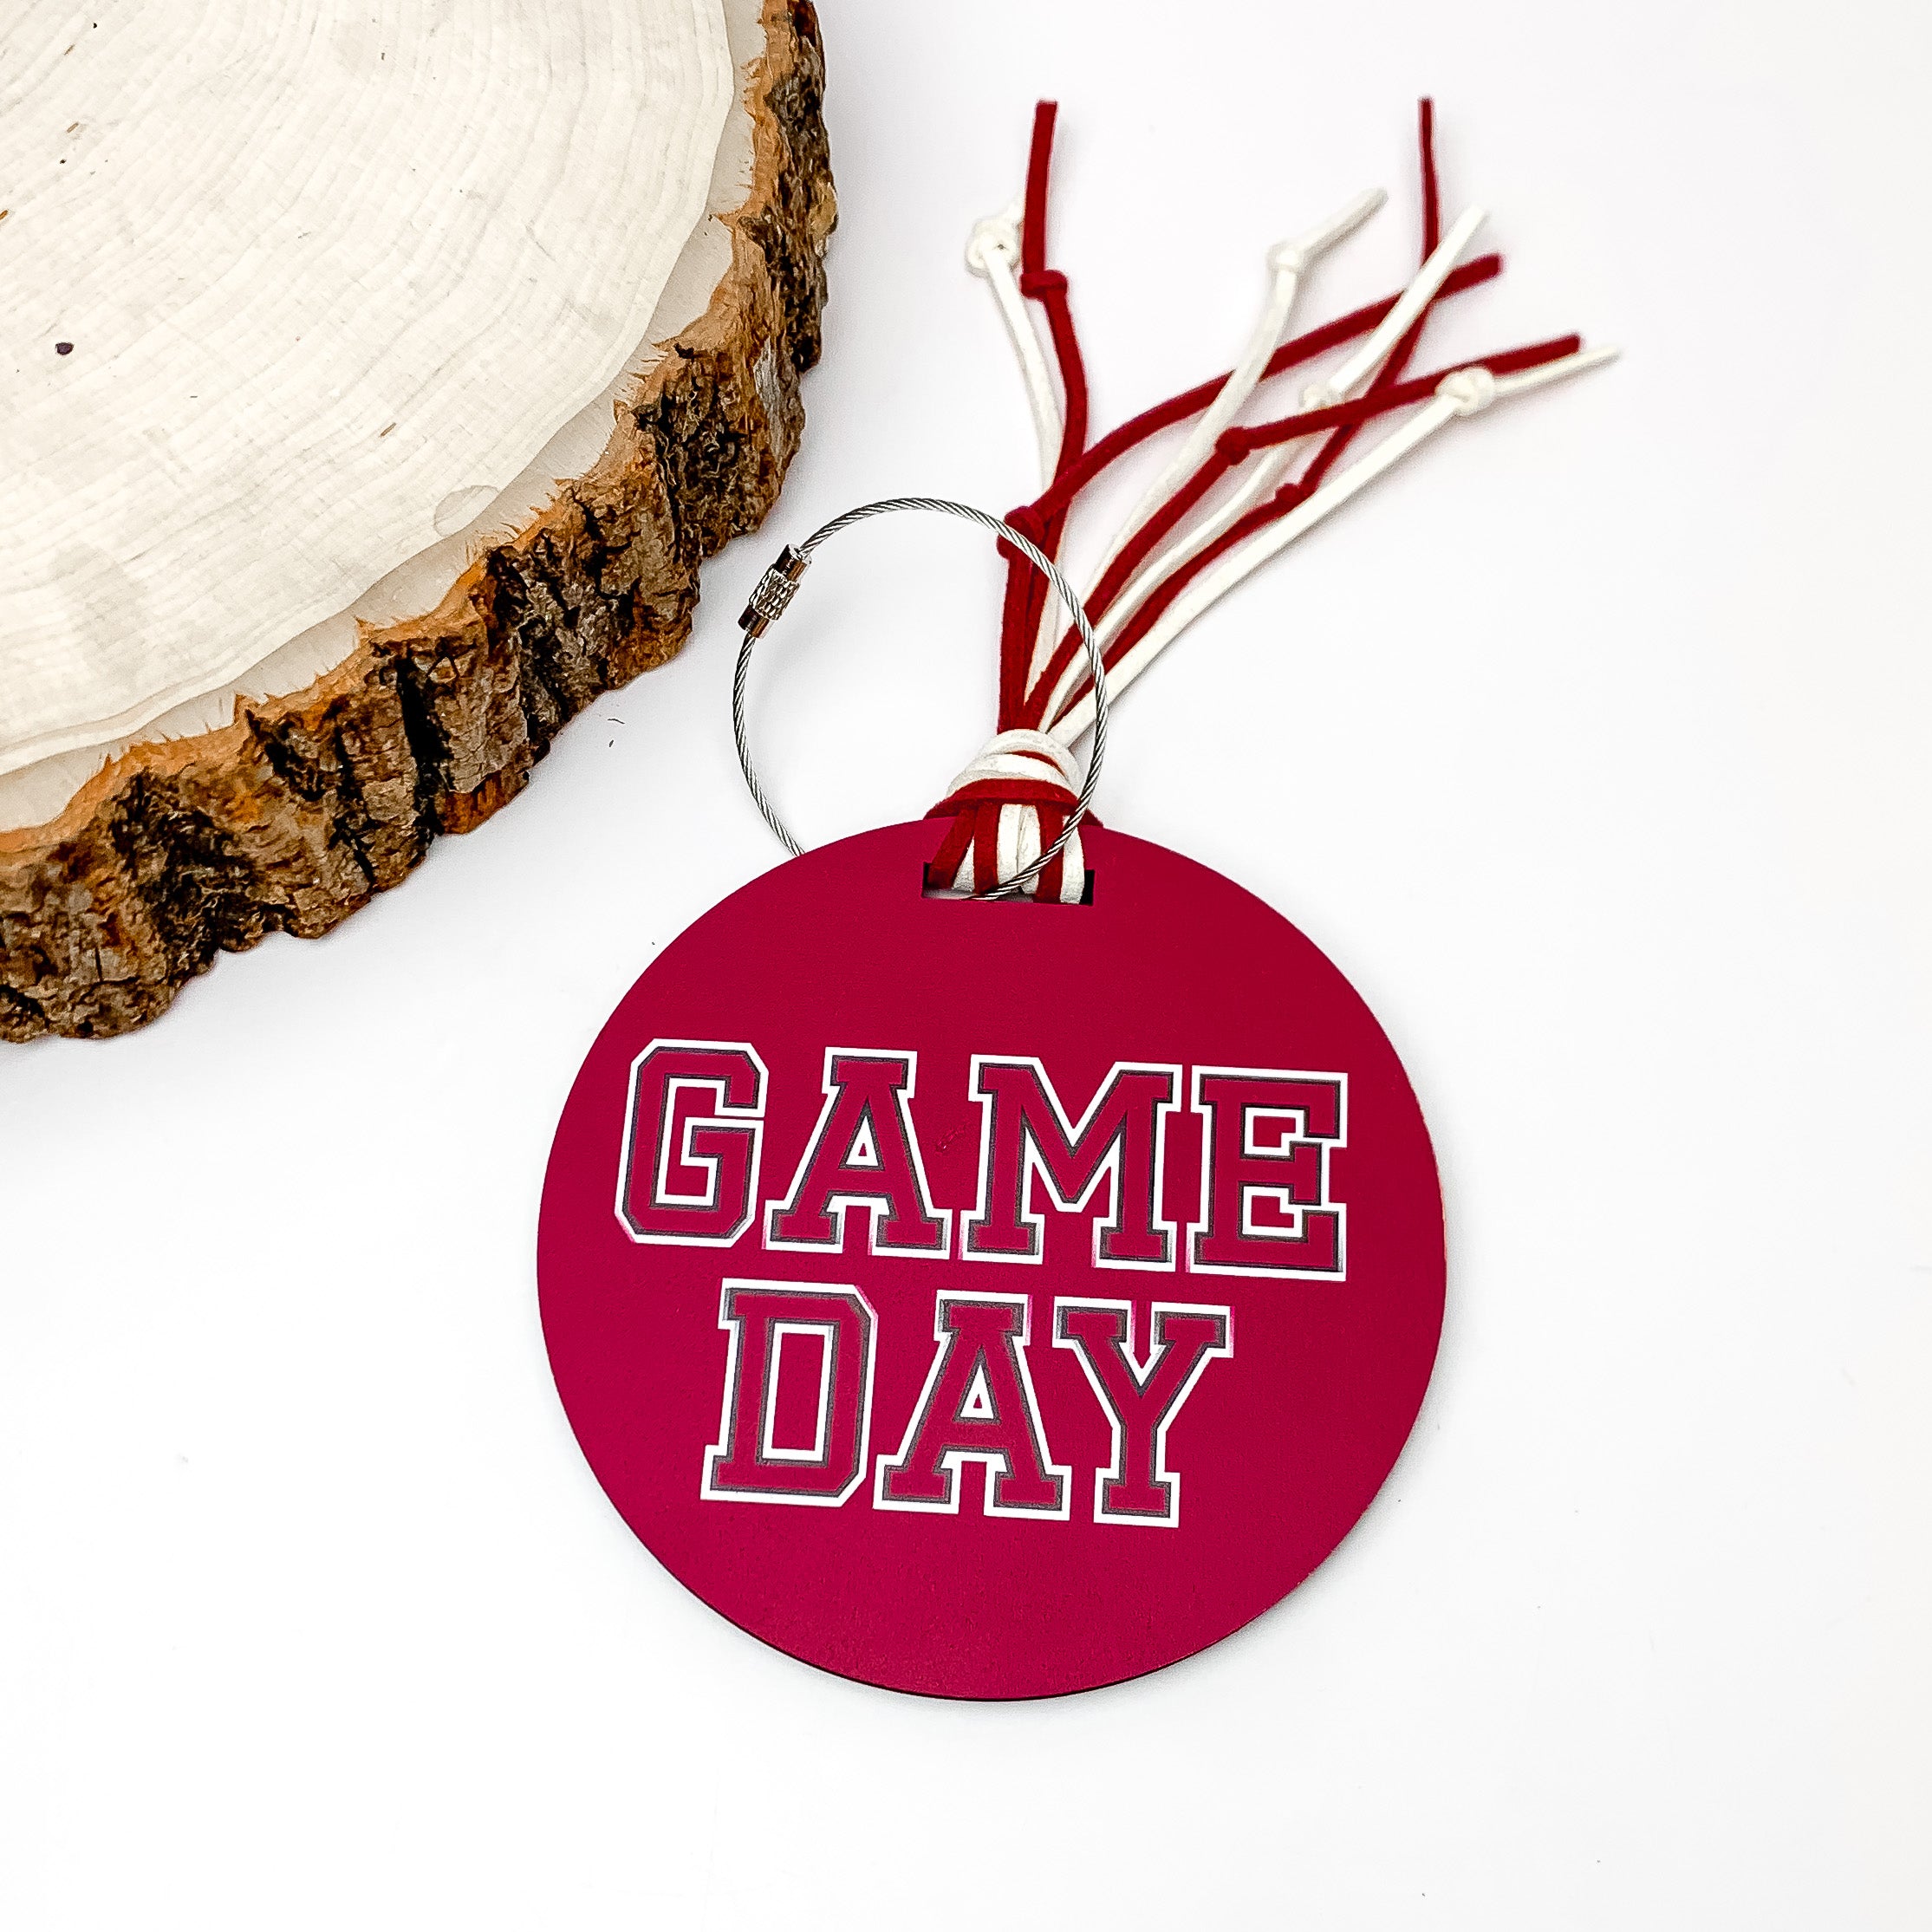 Game Day Luggage Tag in Maroon With White Details. Pictured on a white background with a wood piece in the top left corner.